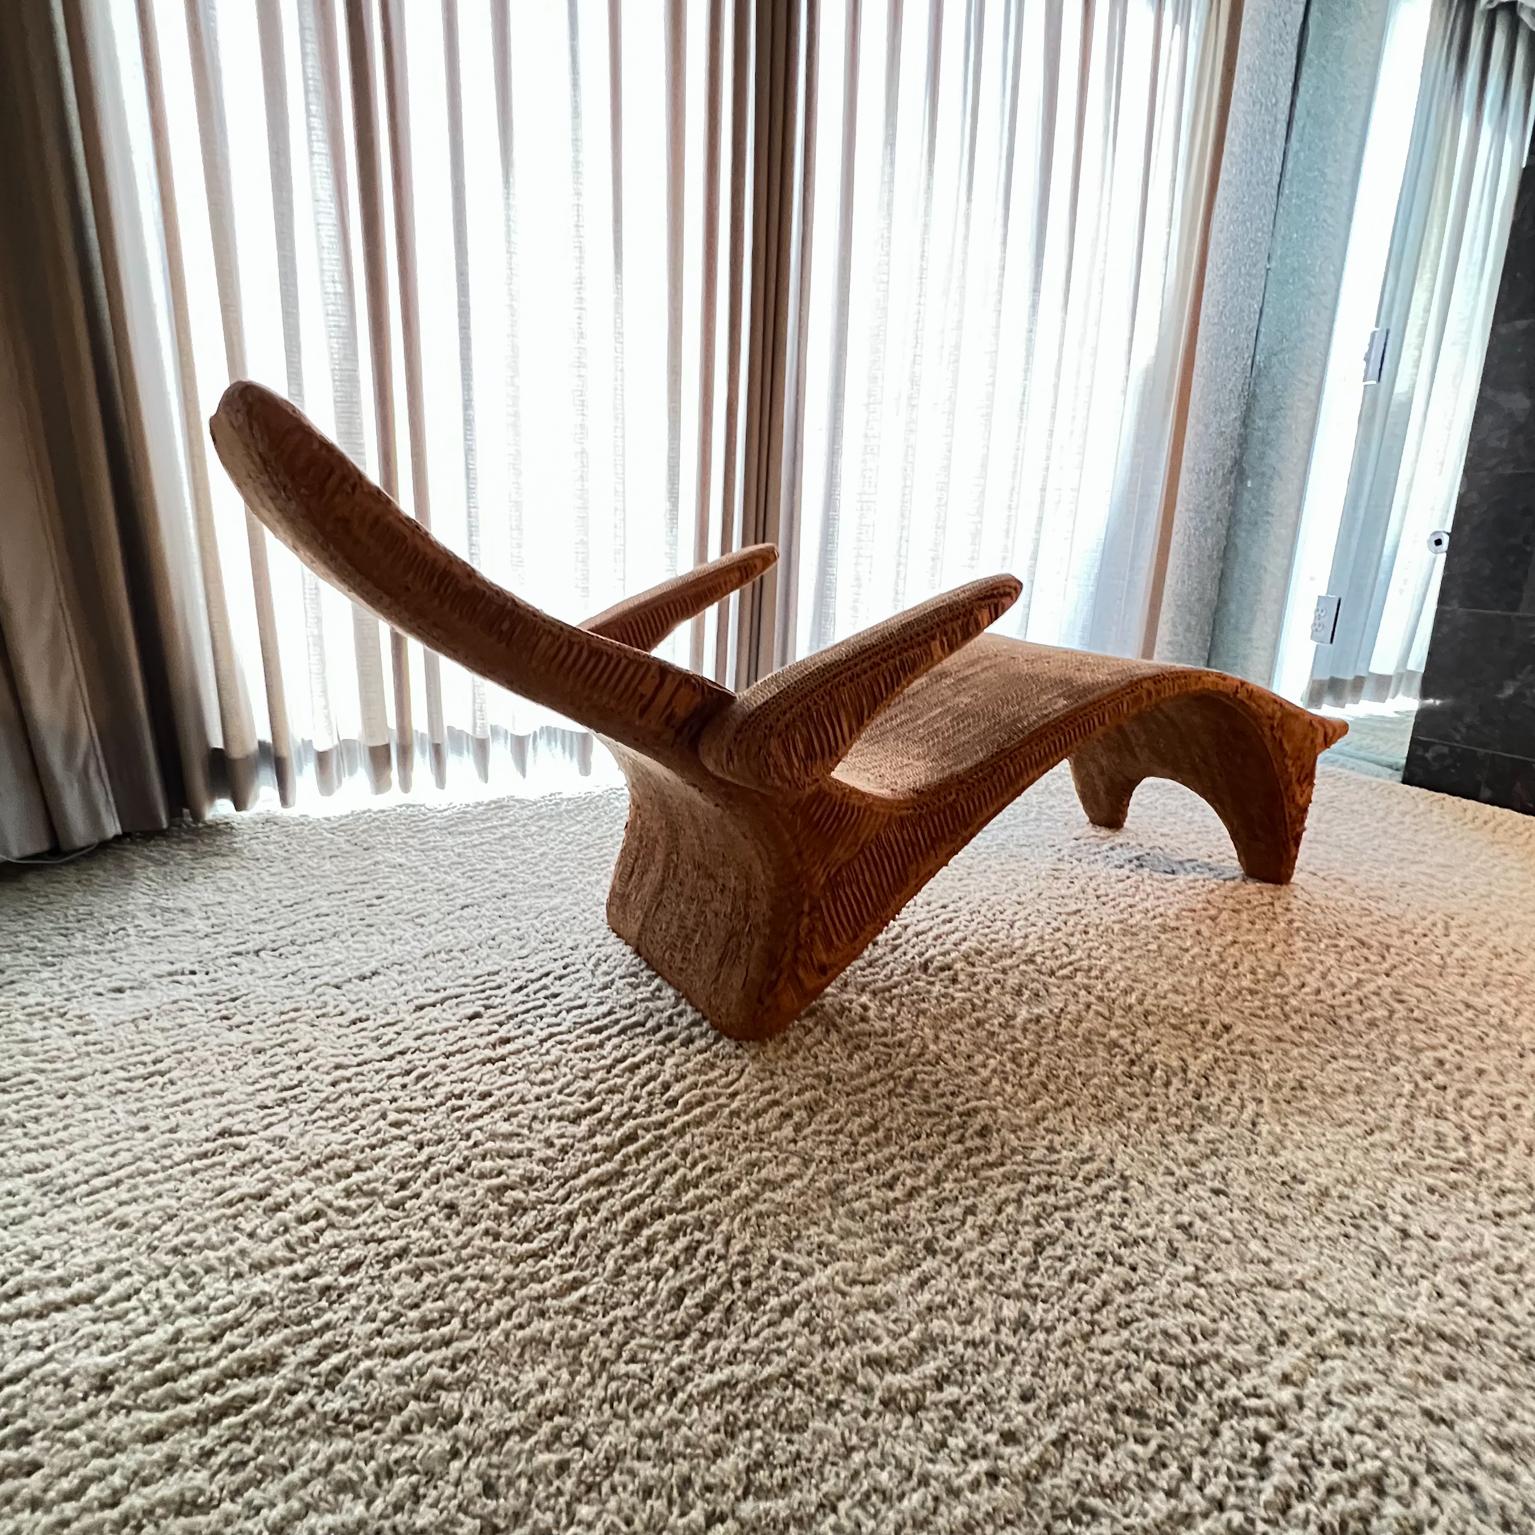  1970s Chaise Lounge LA Art Chair Style of Frank Gehry  For Sale 10